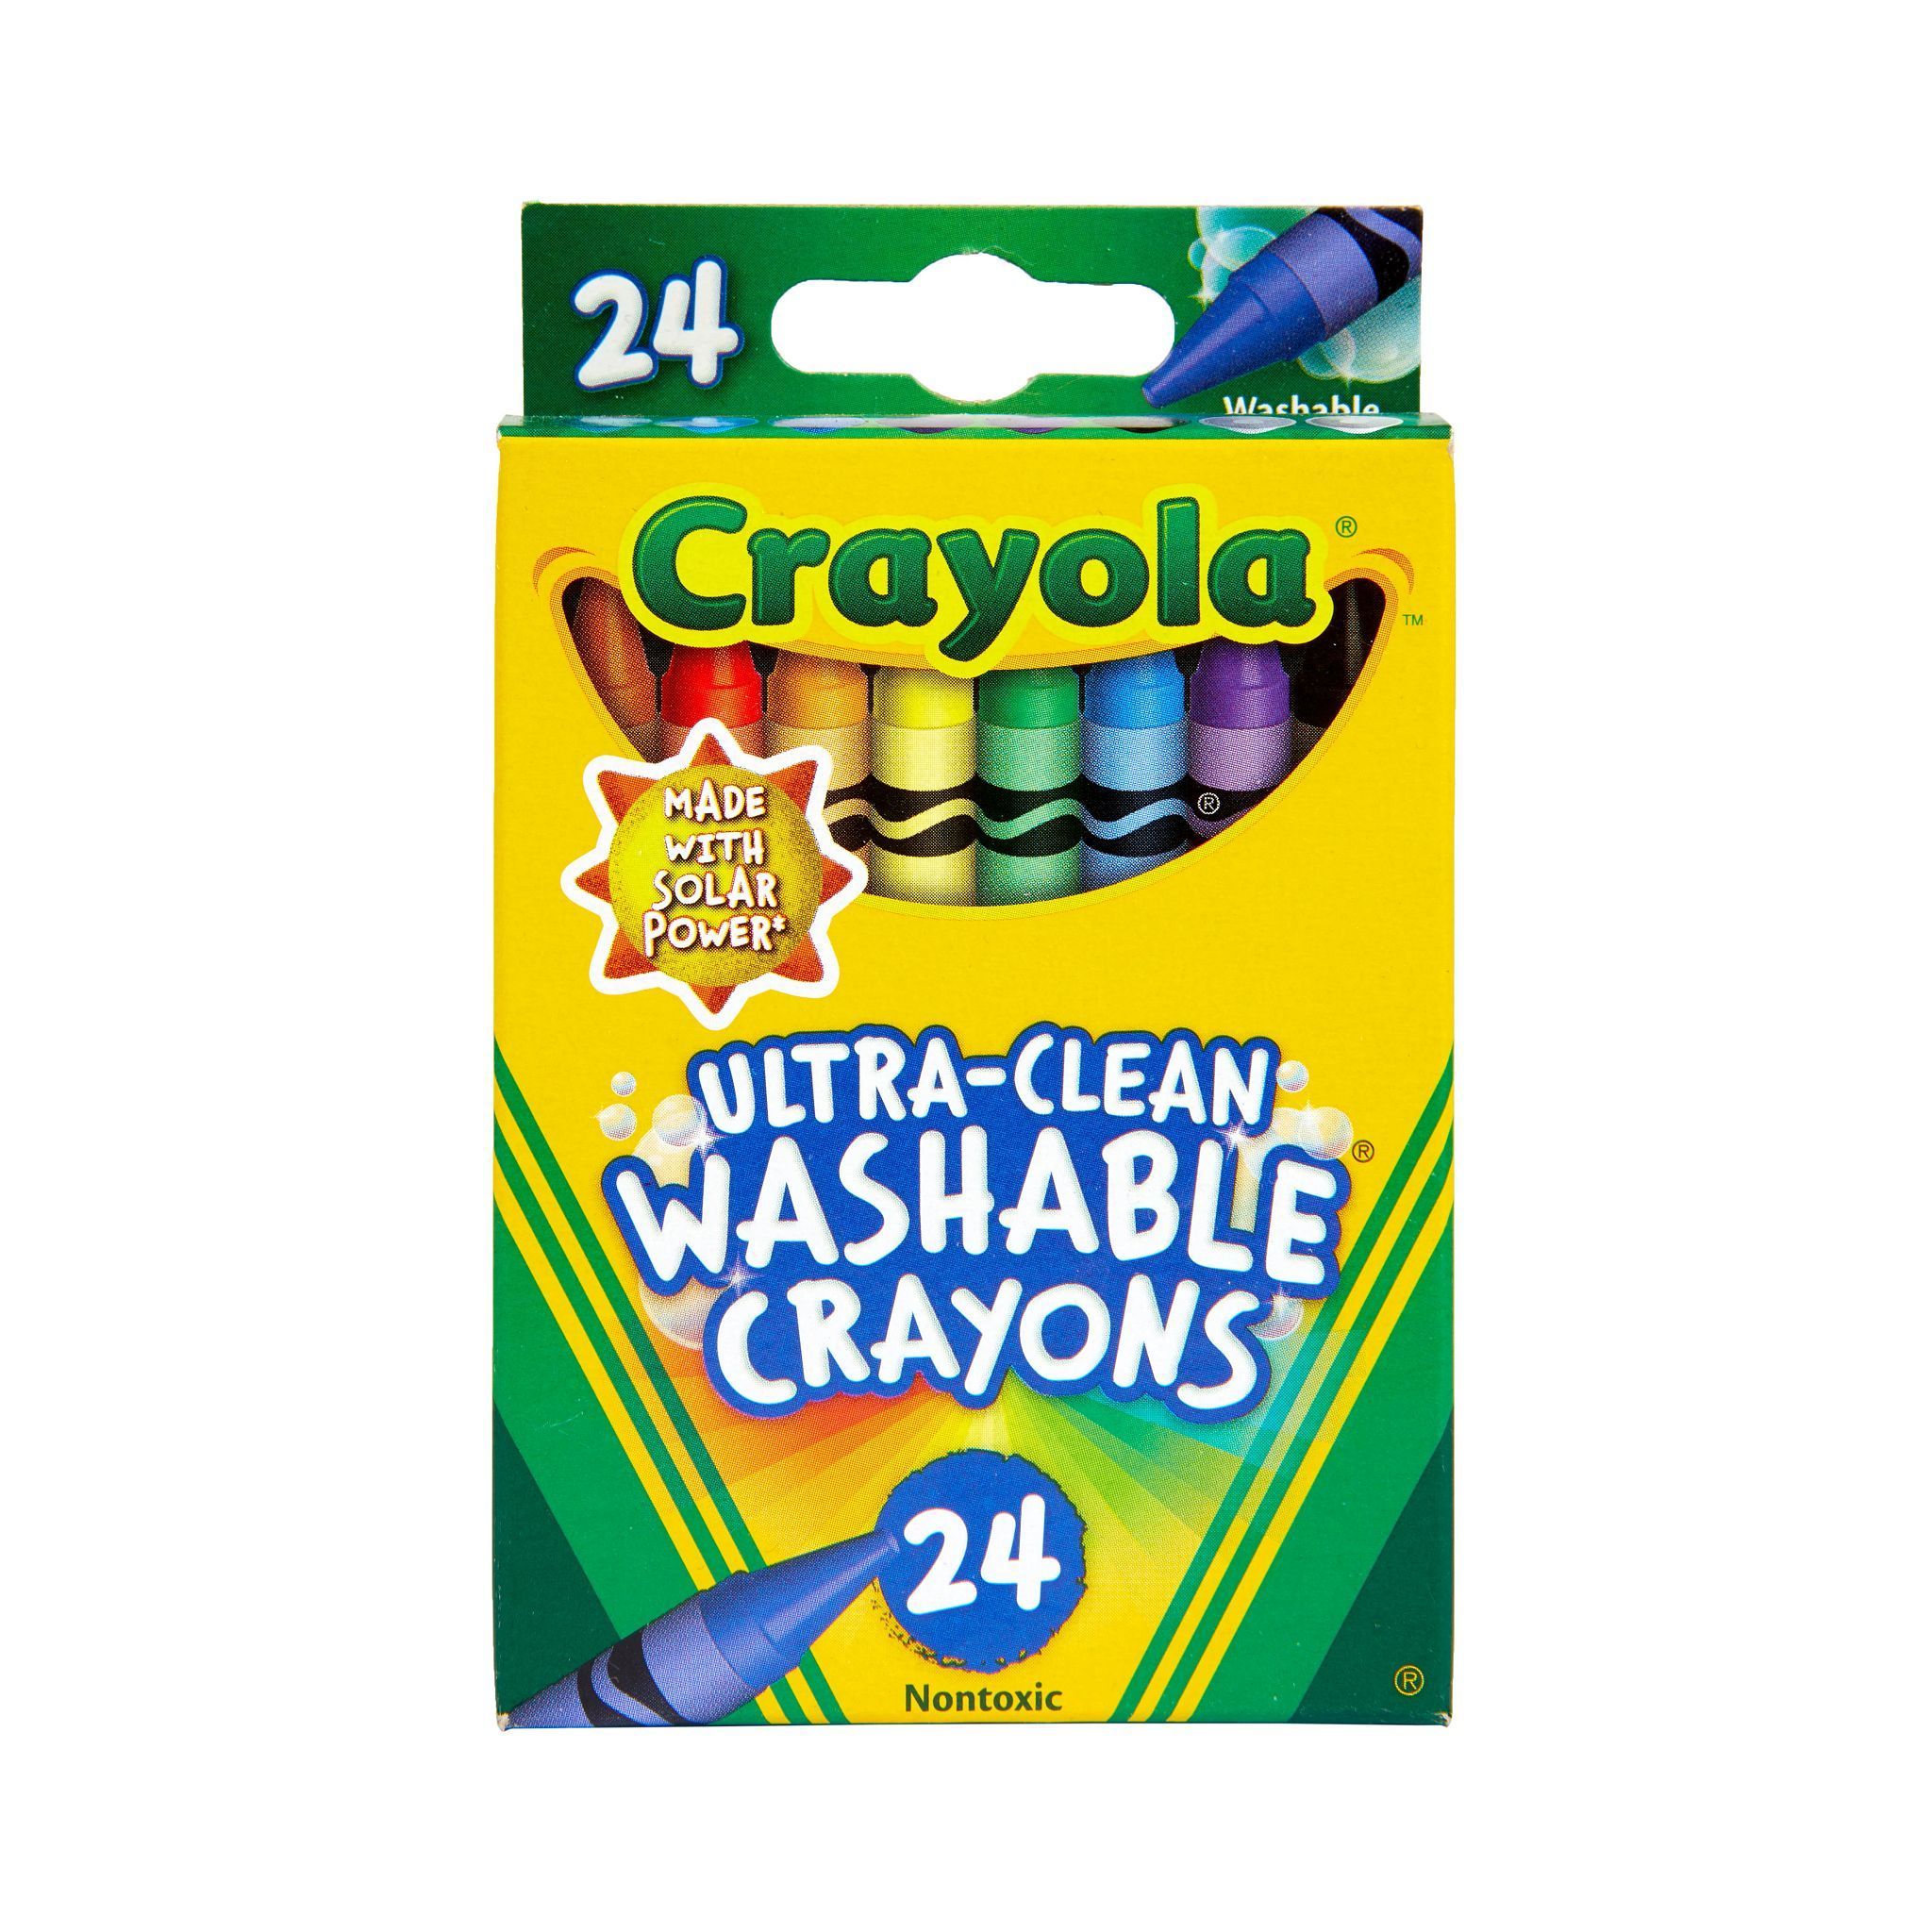 Crayola Ultra-Clean Washable Crayons, 24 Ct, Back to School Supplies for Kids, Art Supplies - image 1 of 9